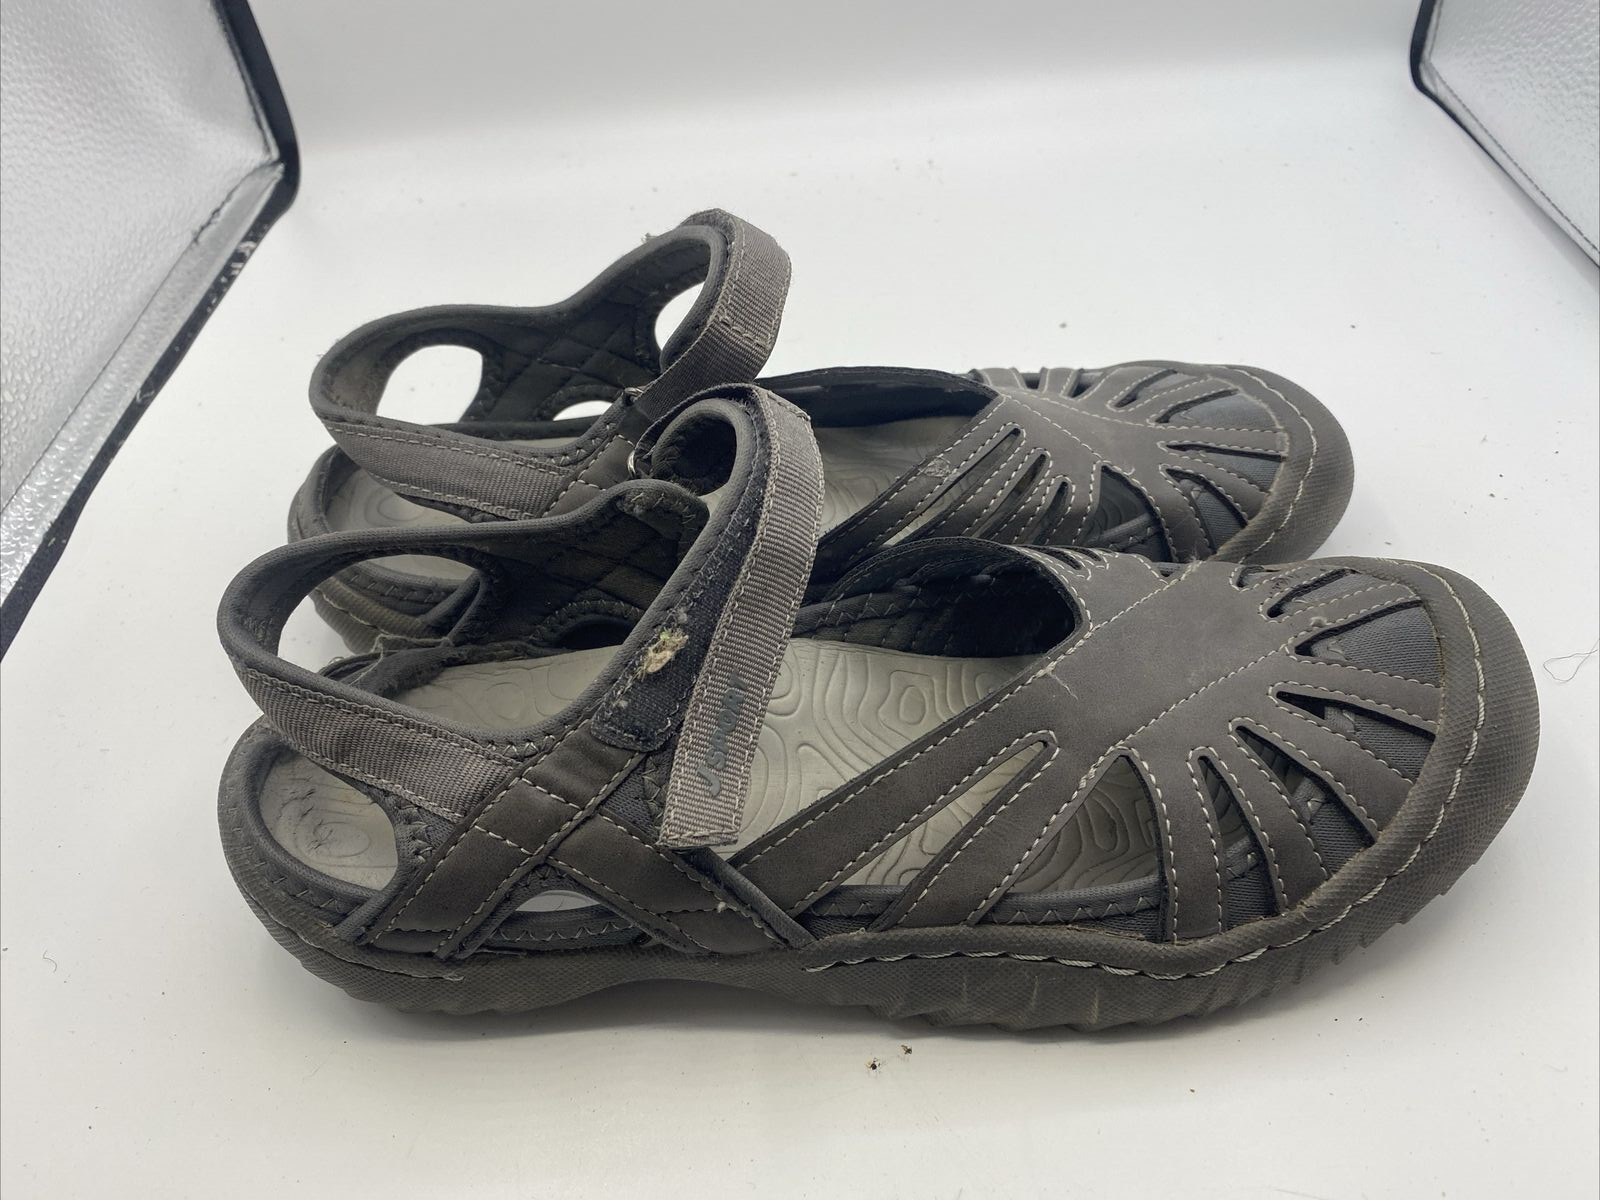 Primary image for Jbu Sports Women’s Sandals Size 10 Gray 